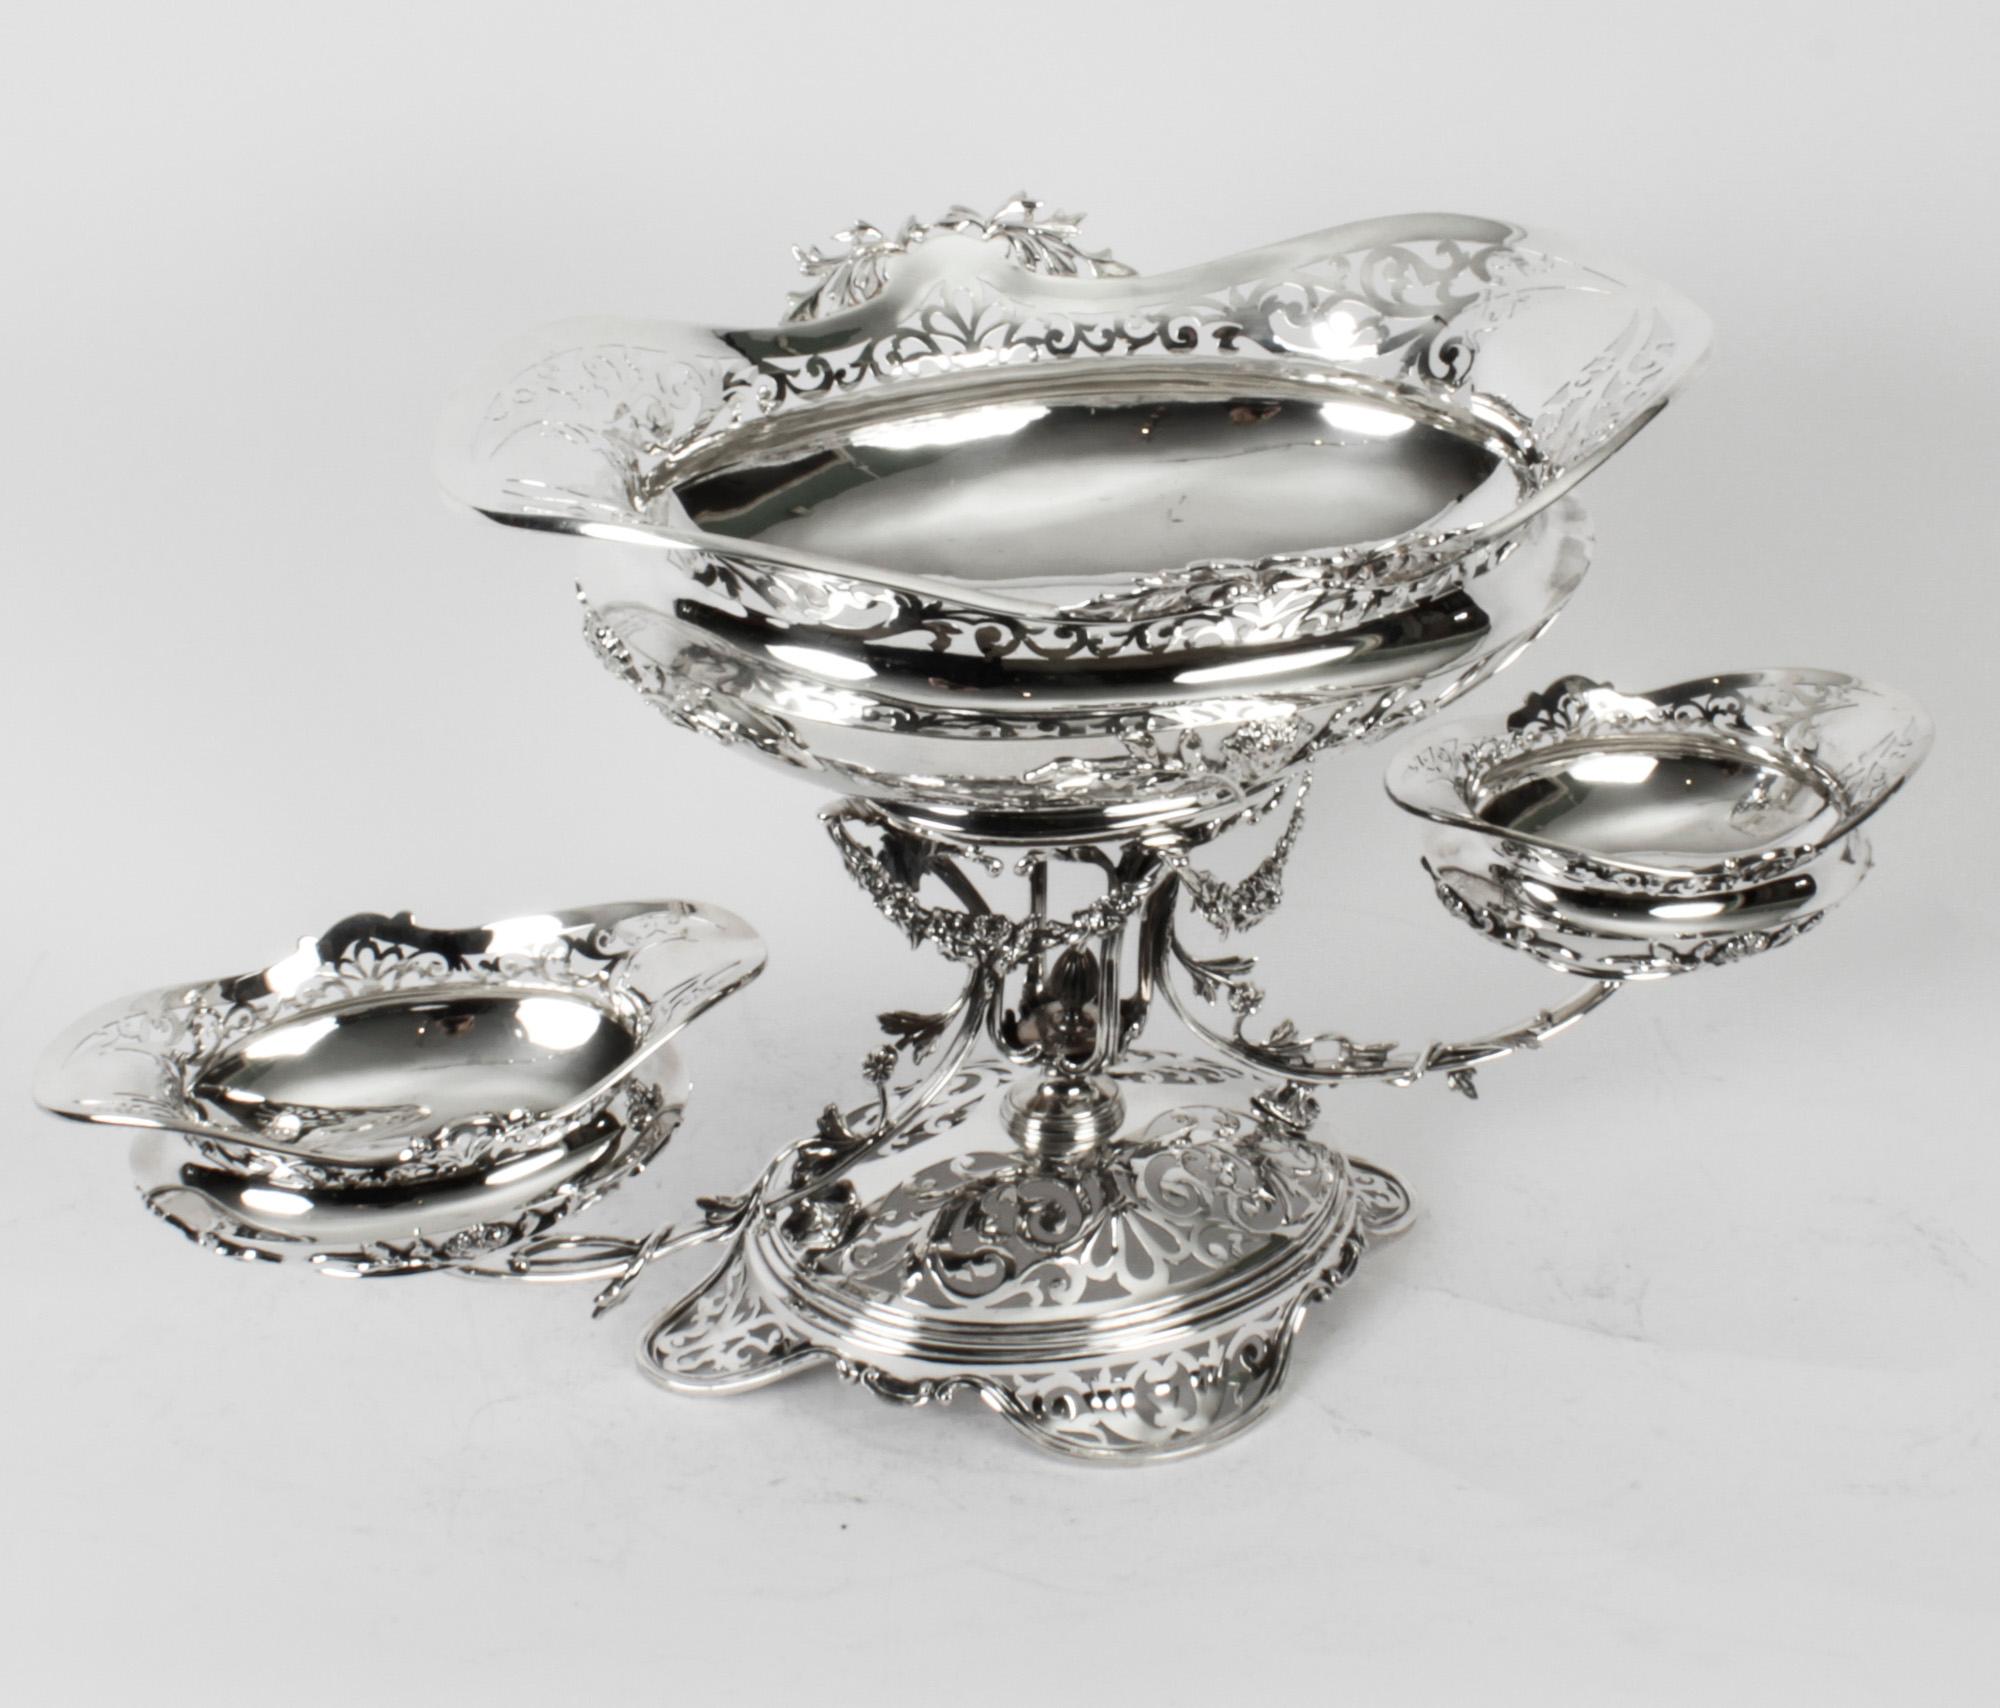 Antique Victorian Silverplate Centrepiece Mappin & Webb 1880 19th Century For Sale 4